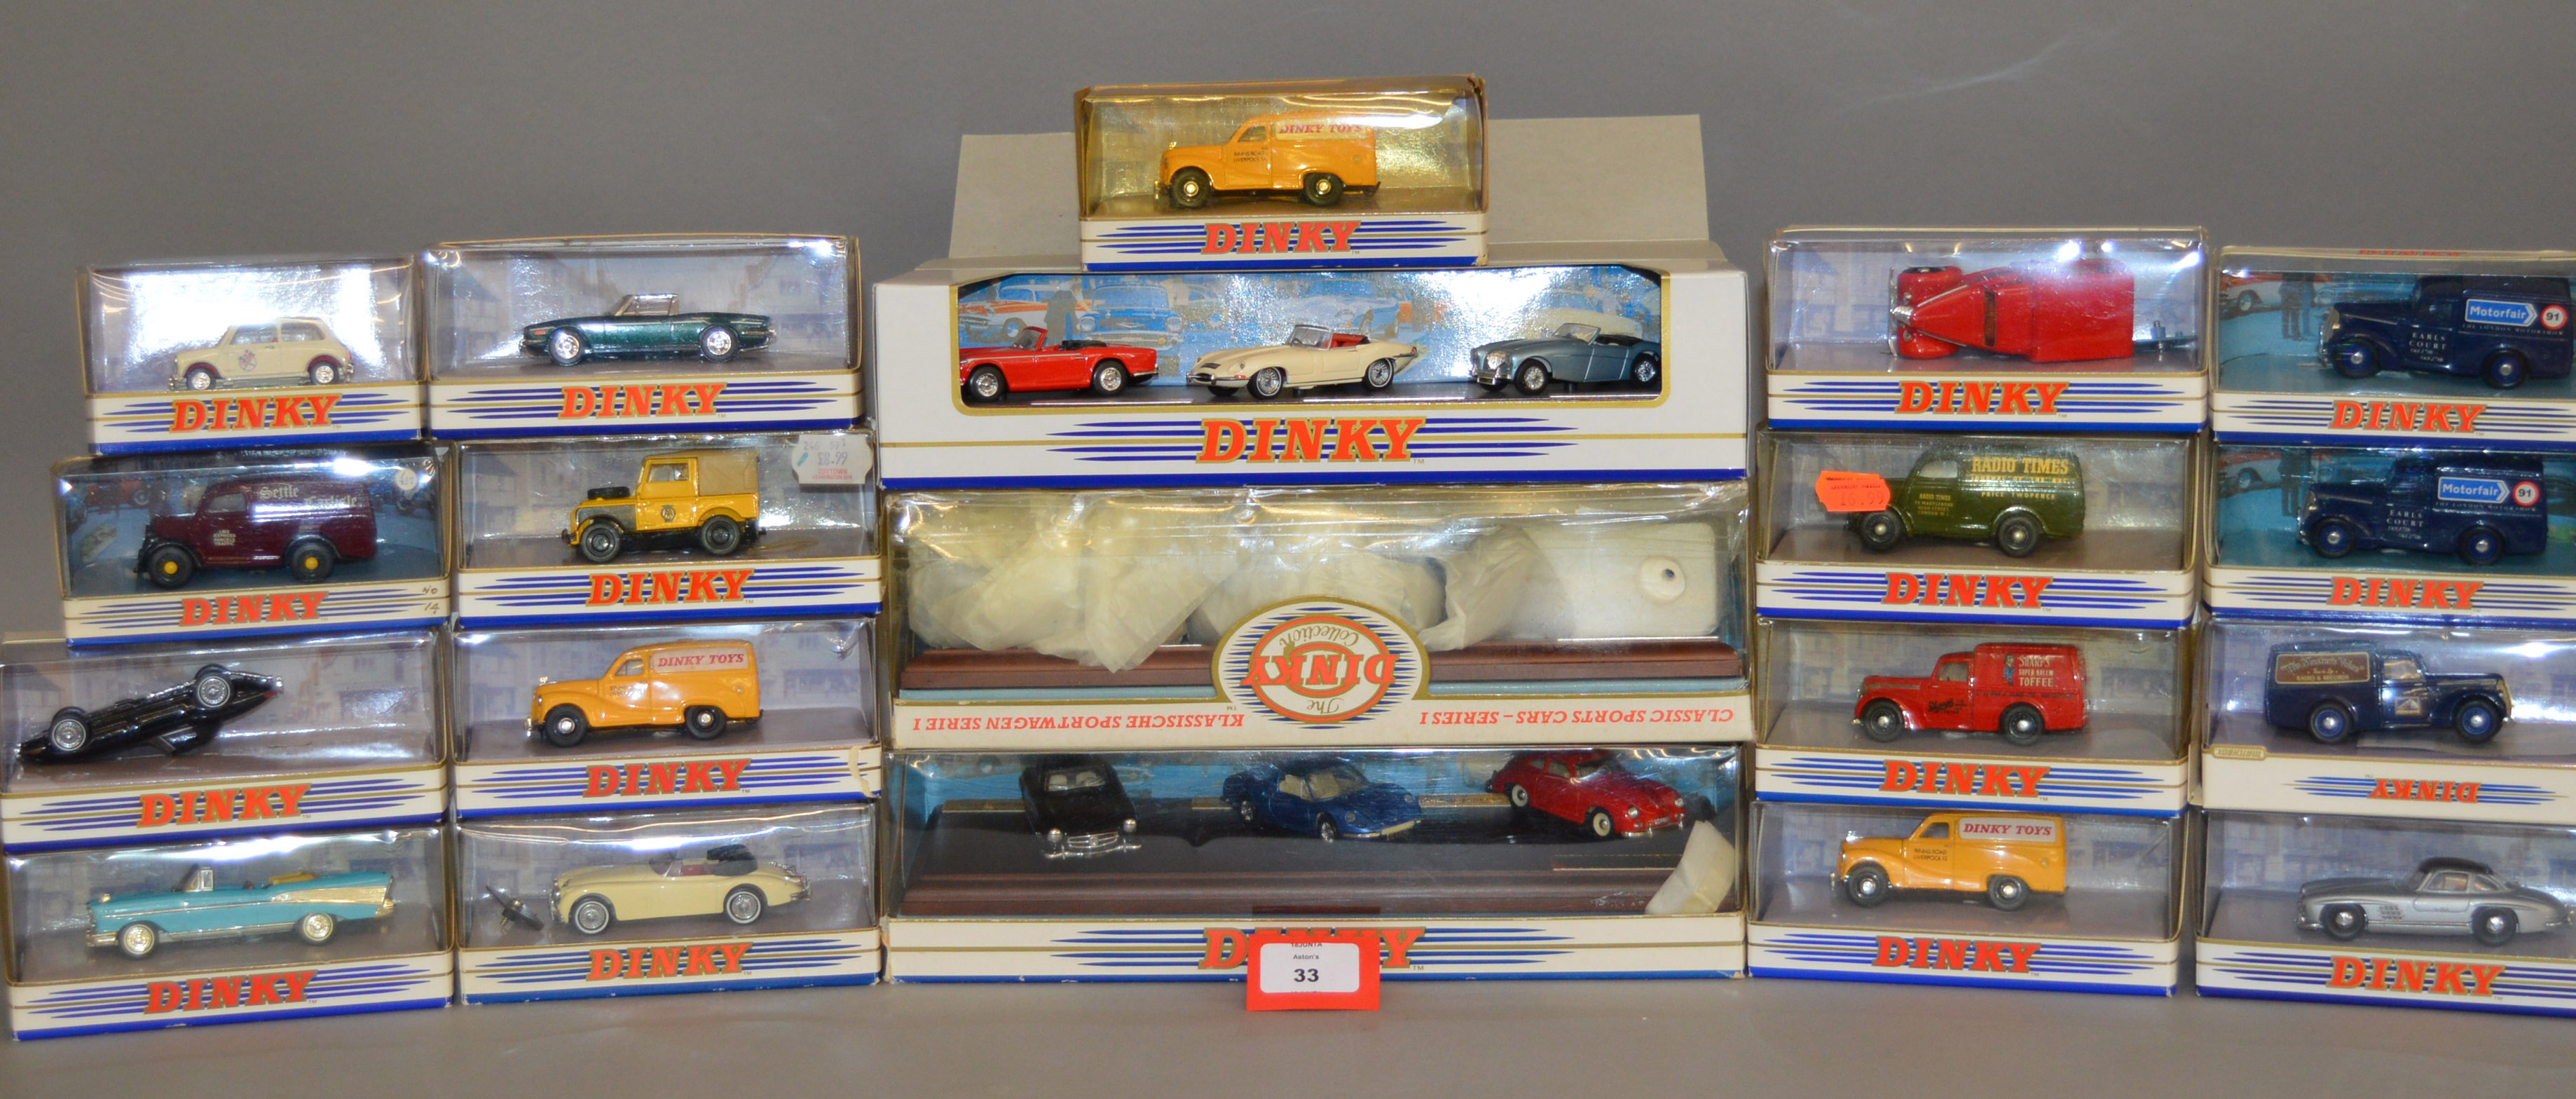 20 x Matchbox Dinky diecast models. Boxed, but have been opened. G-E.